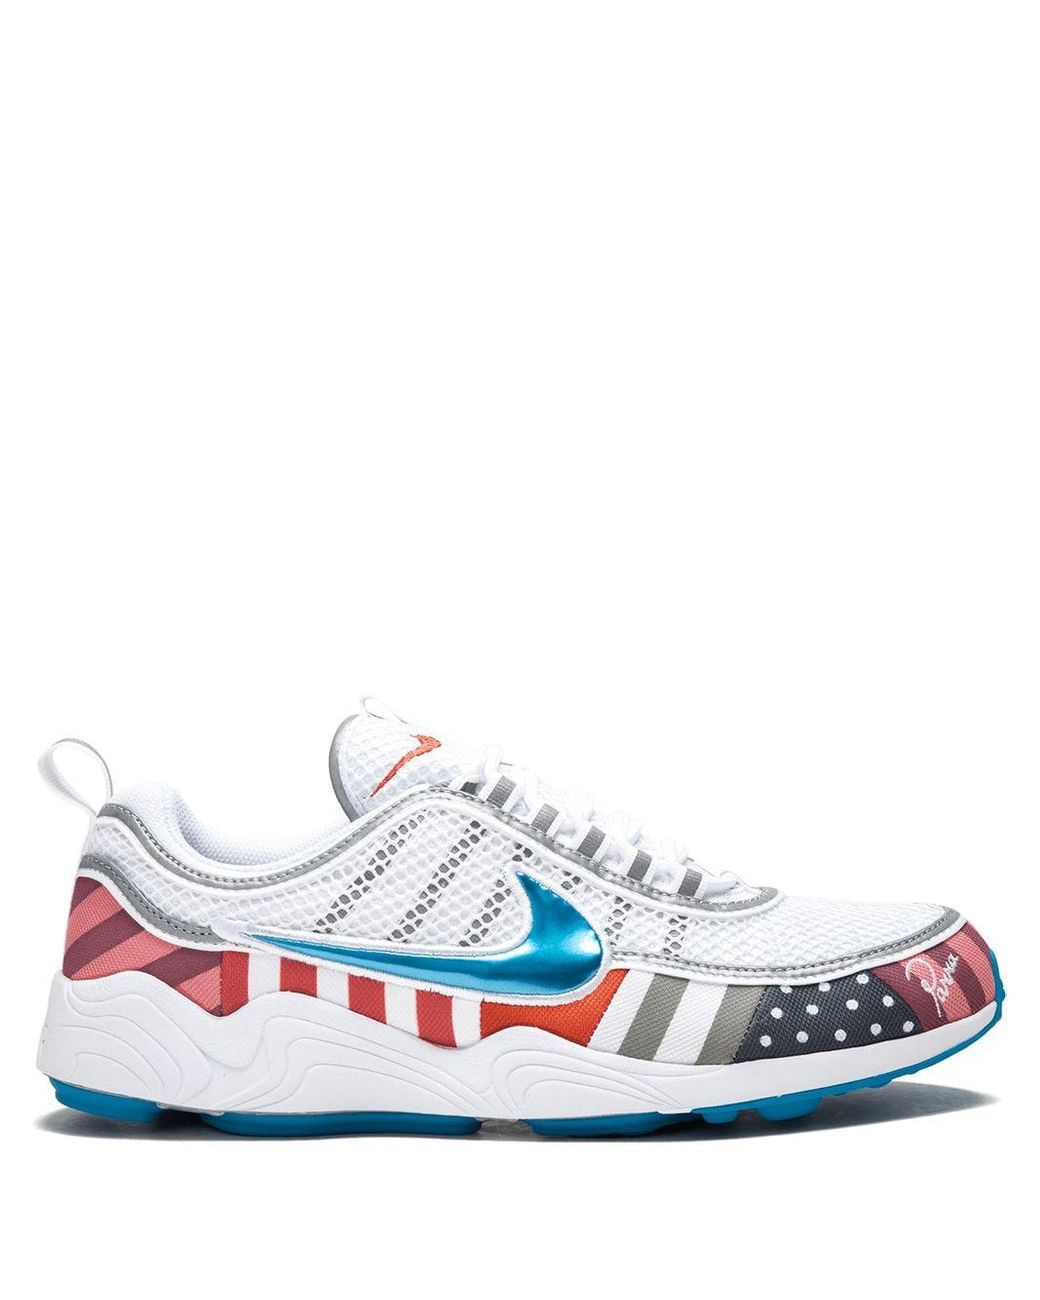 Nike Air Zoom Spiridon 'parra' Shoes in White for Men - Lyst